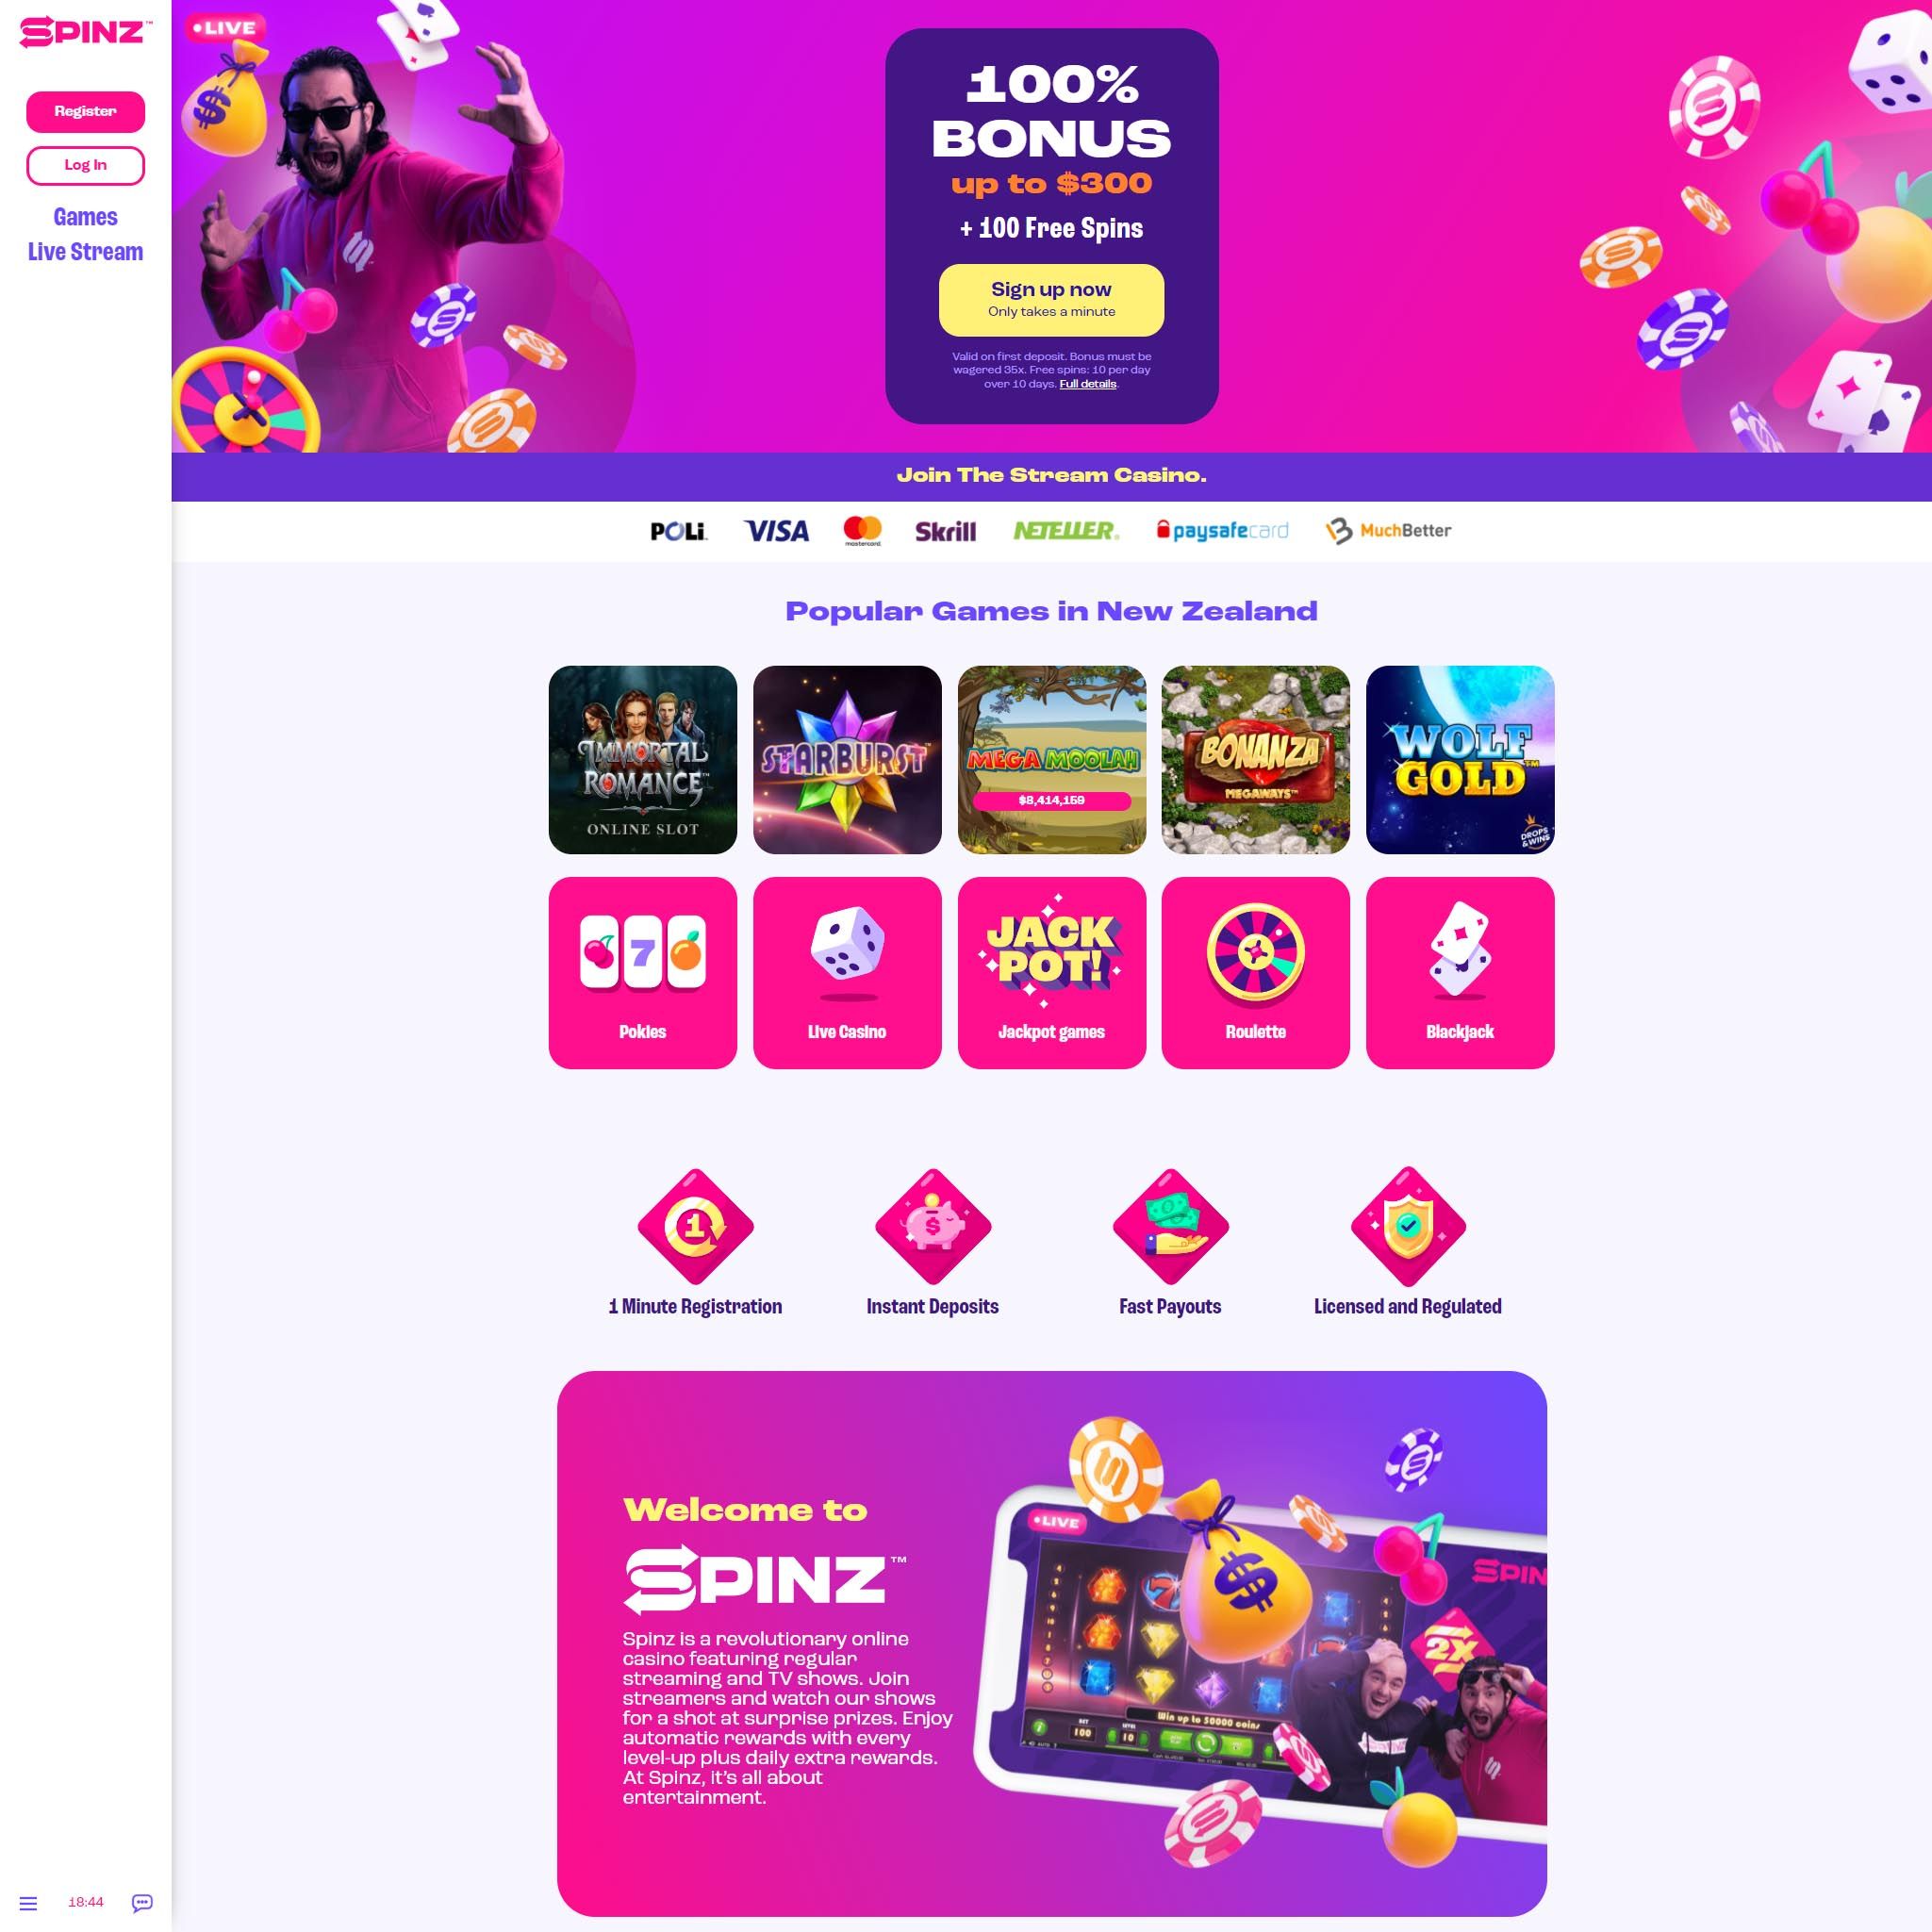 Spinz Casino NZ review by Mr. Gamble